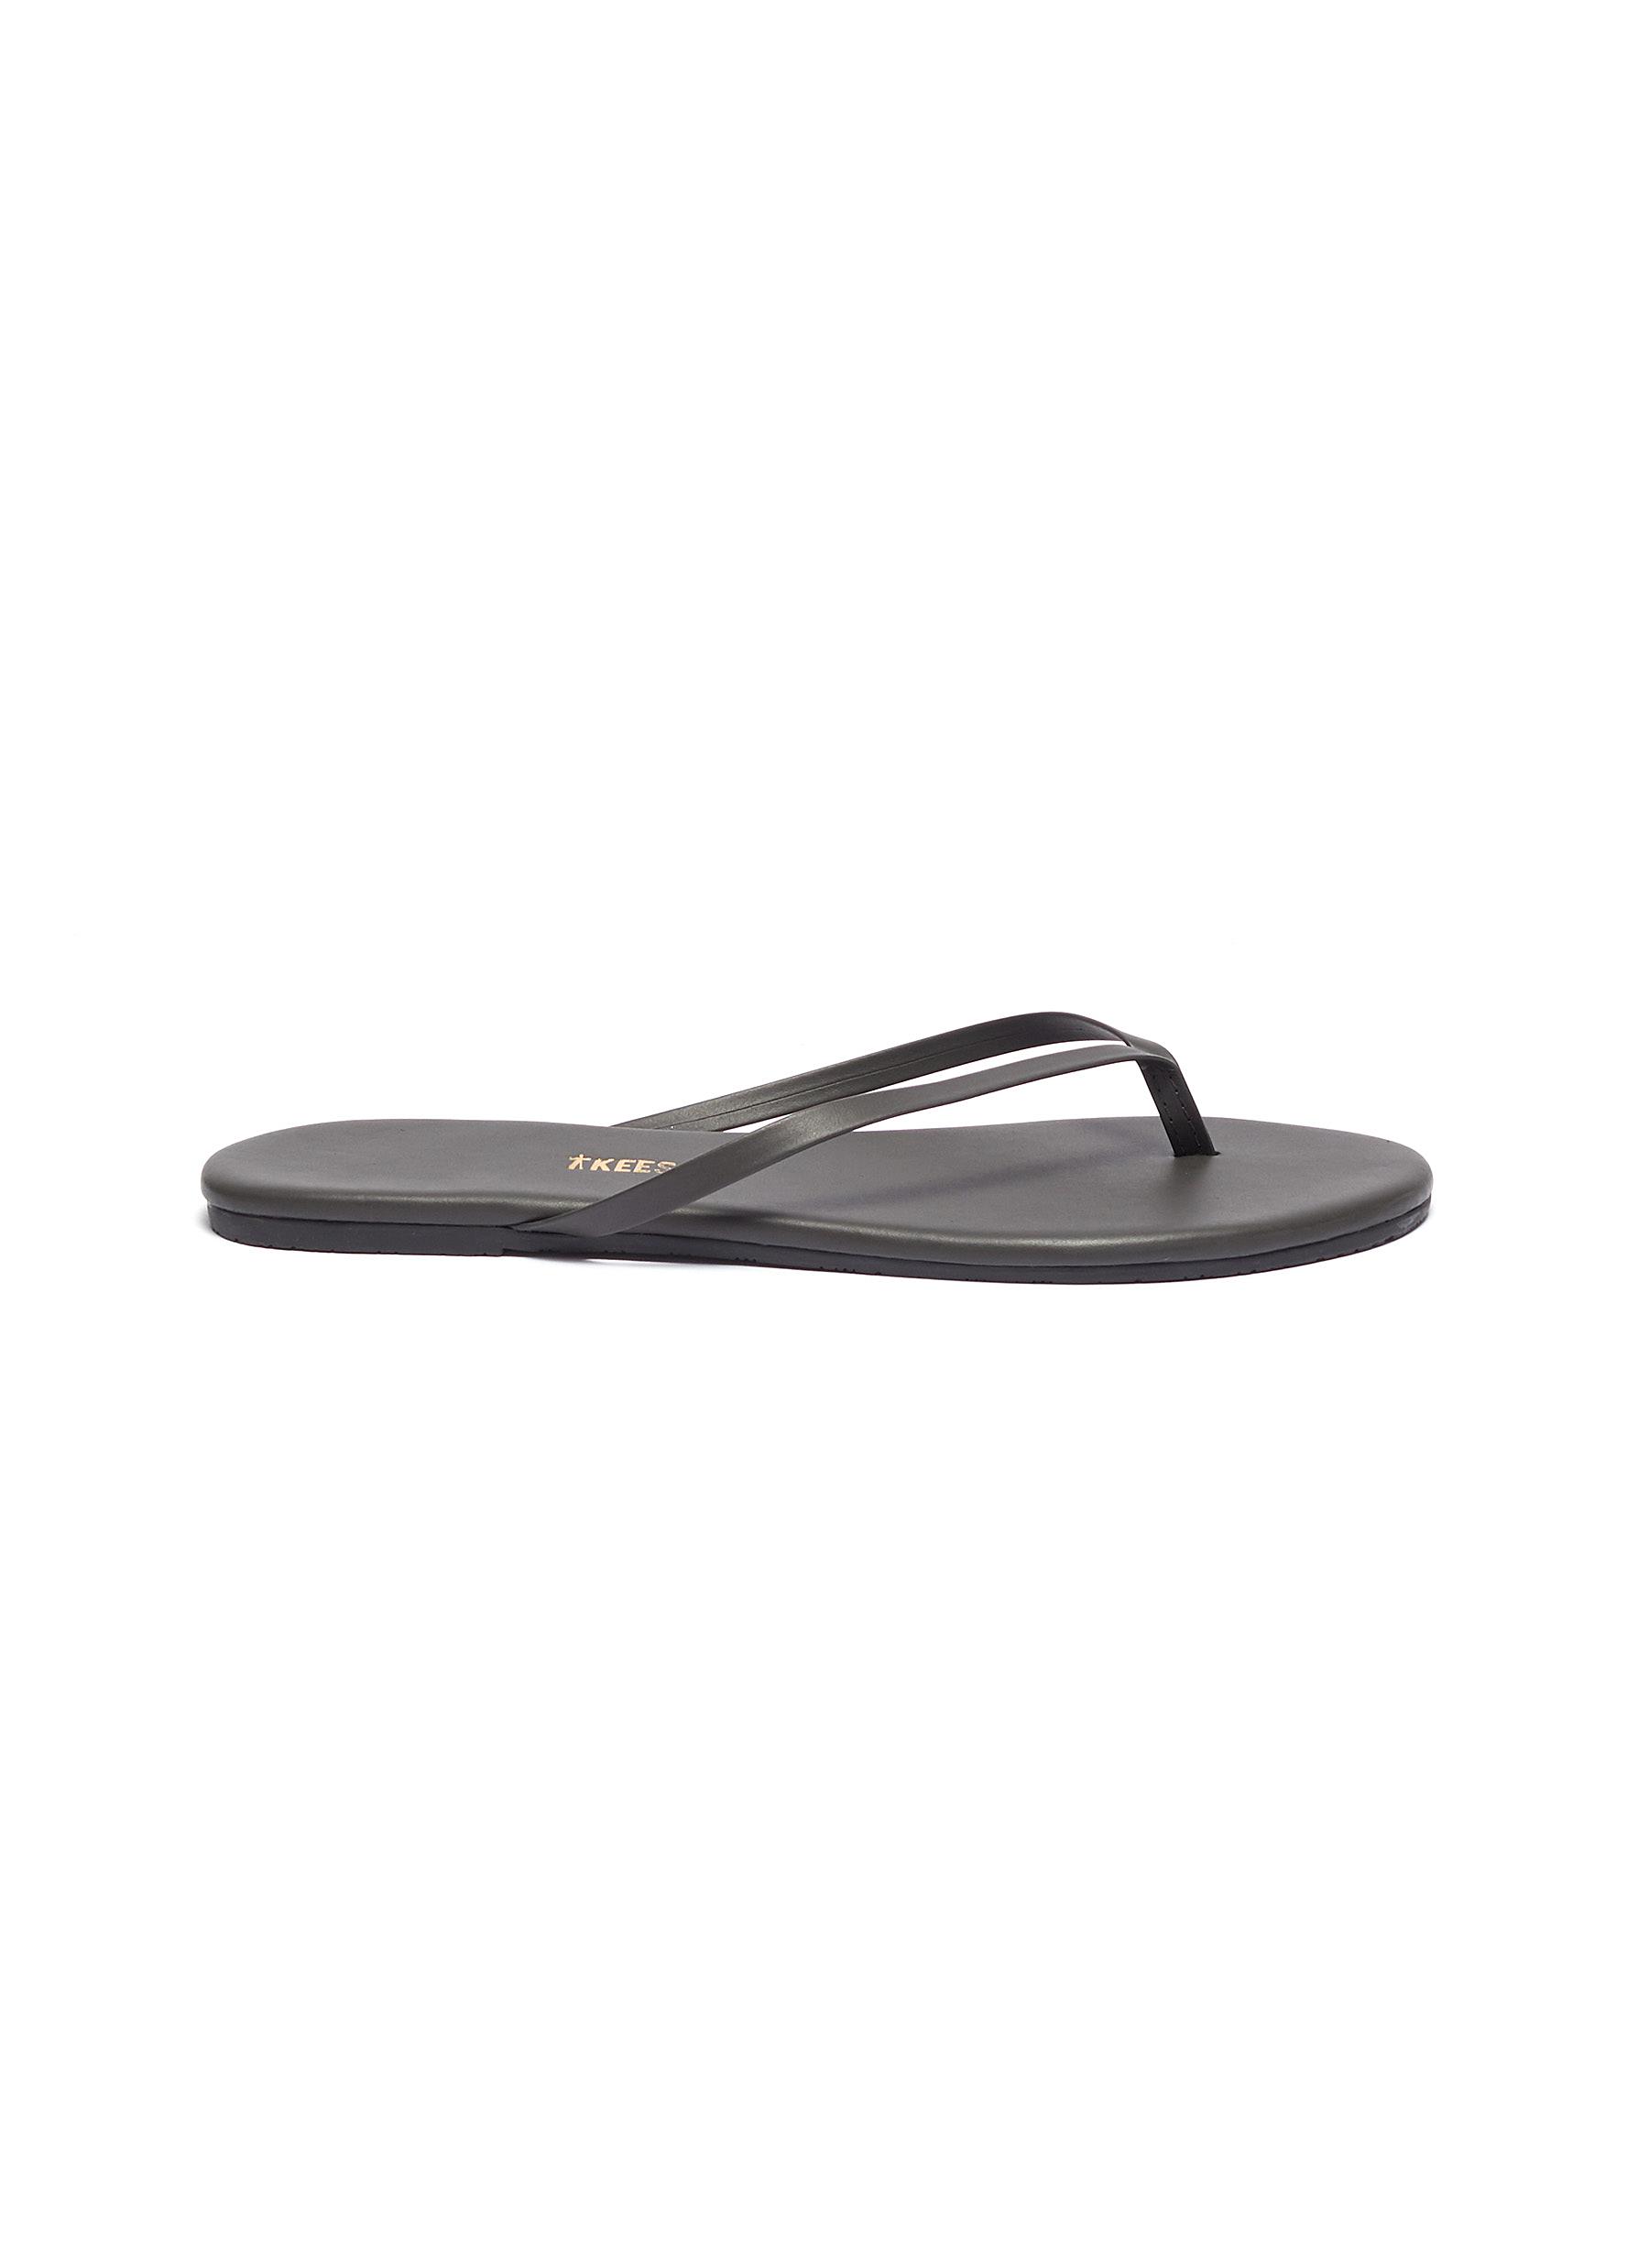 Tkees Flats Solids leather flip flops